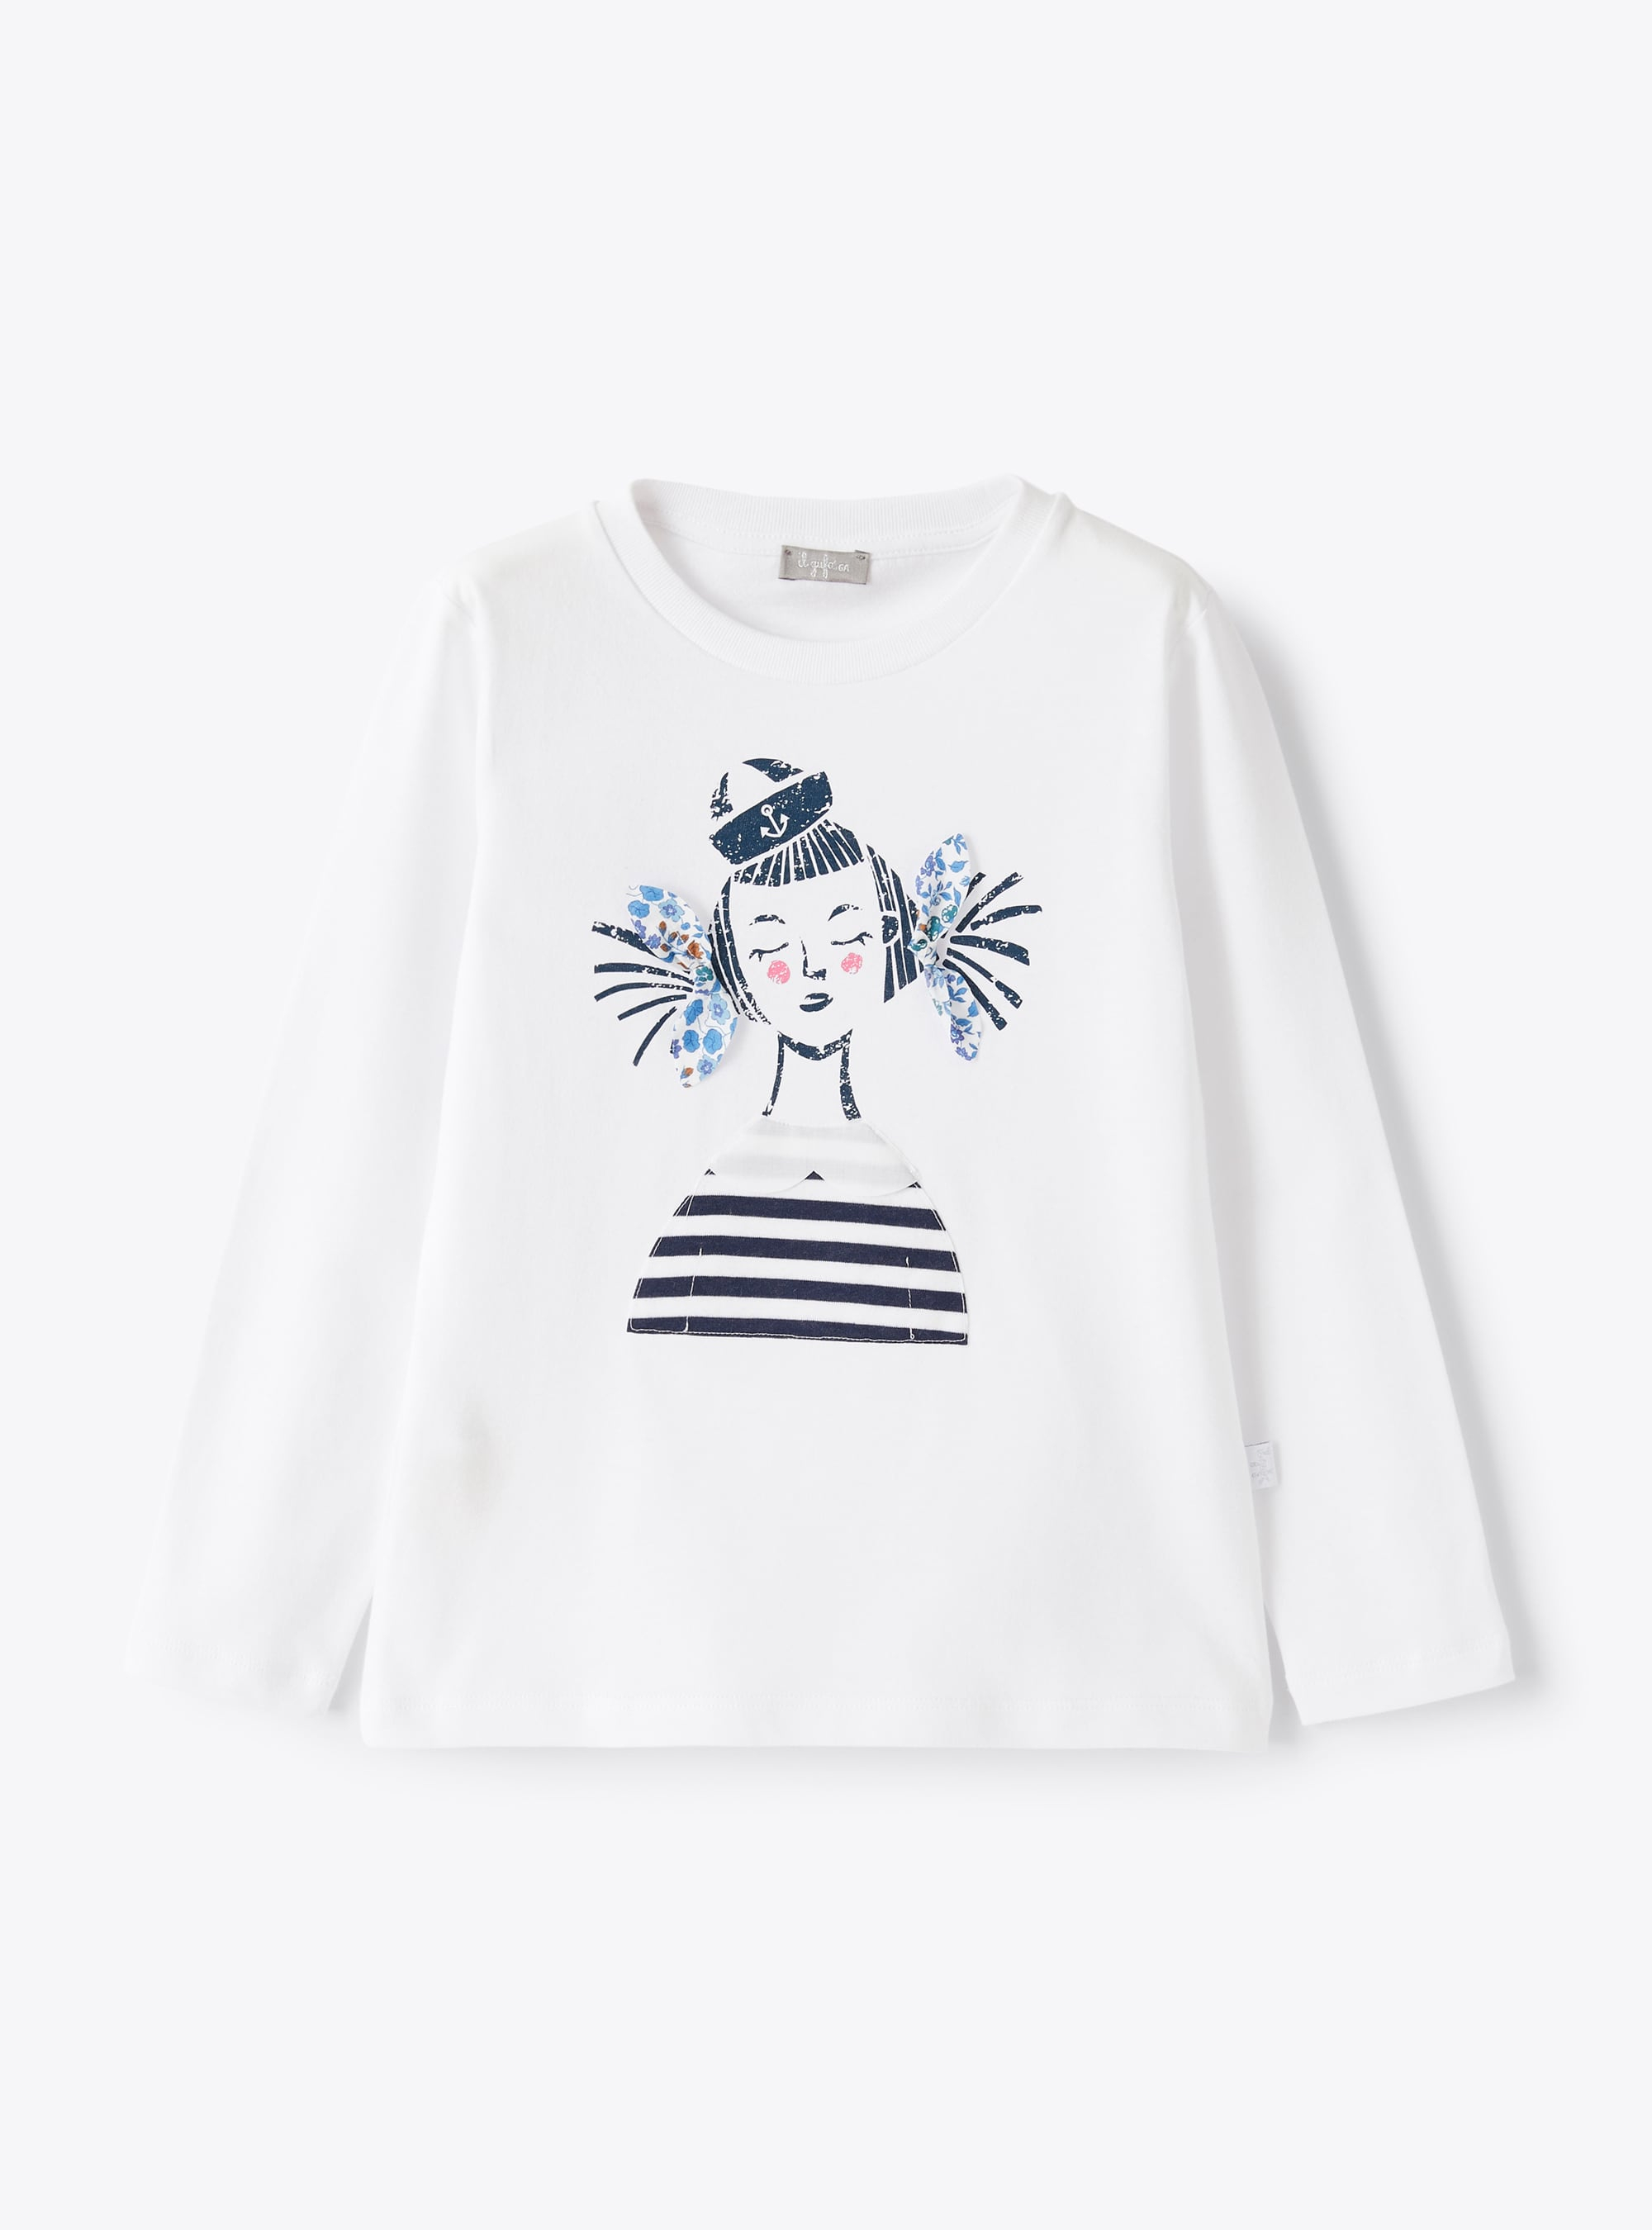 Long-sleeve t-shirt with print of little girl - T-shirts - Il Gufo